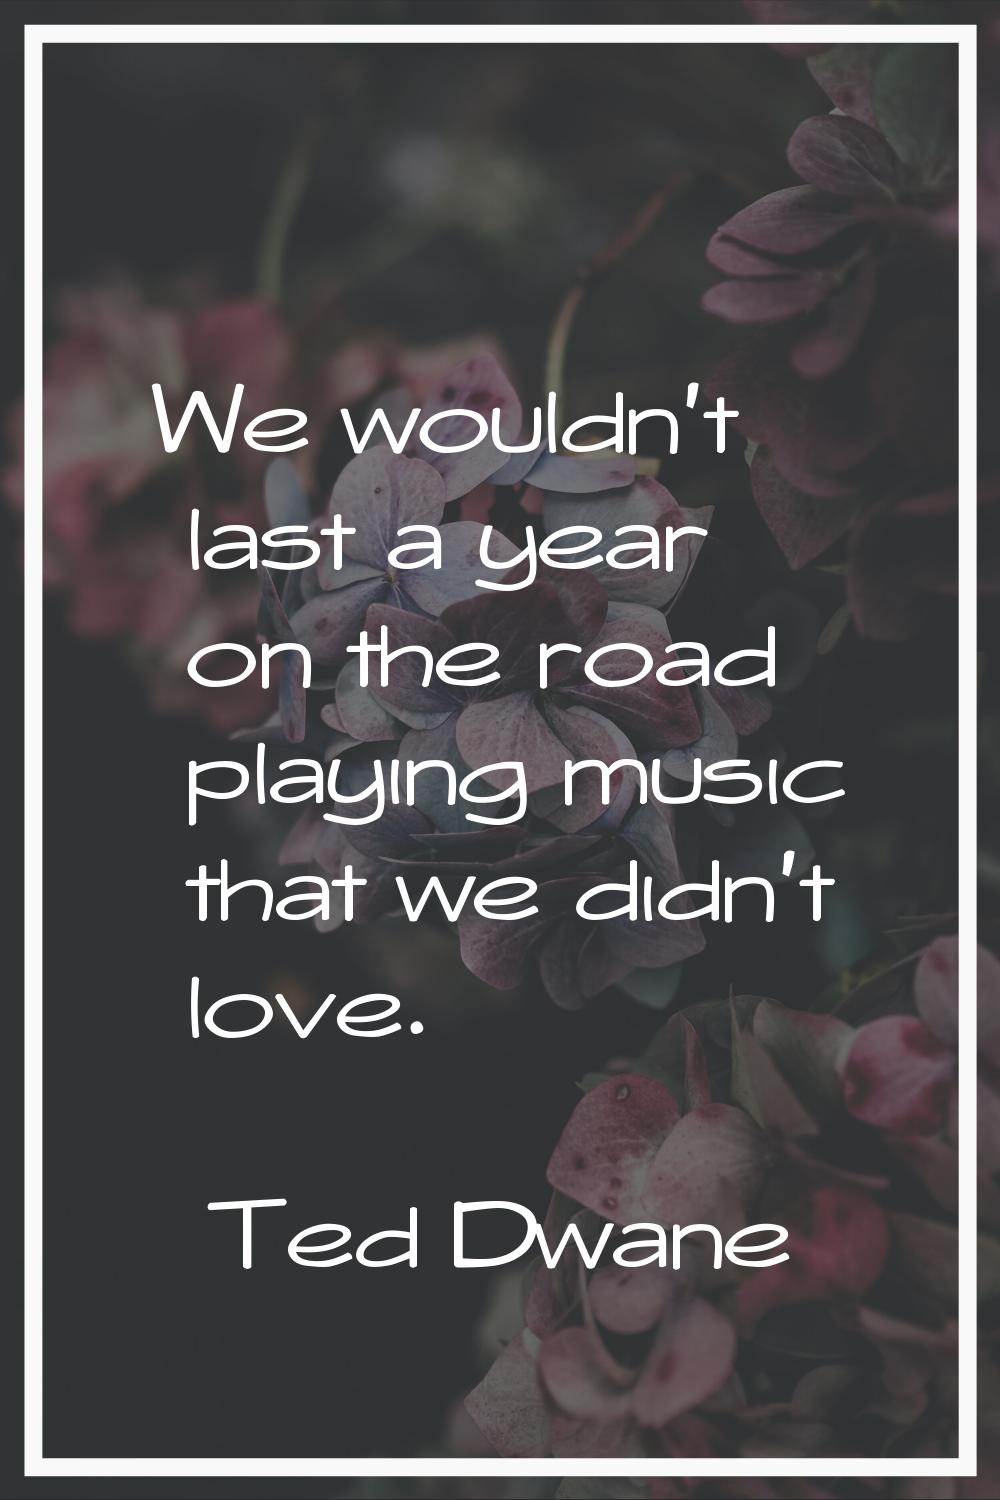 We wouldn't last a year on the road playing music that we didn't love.